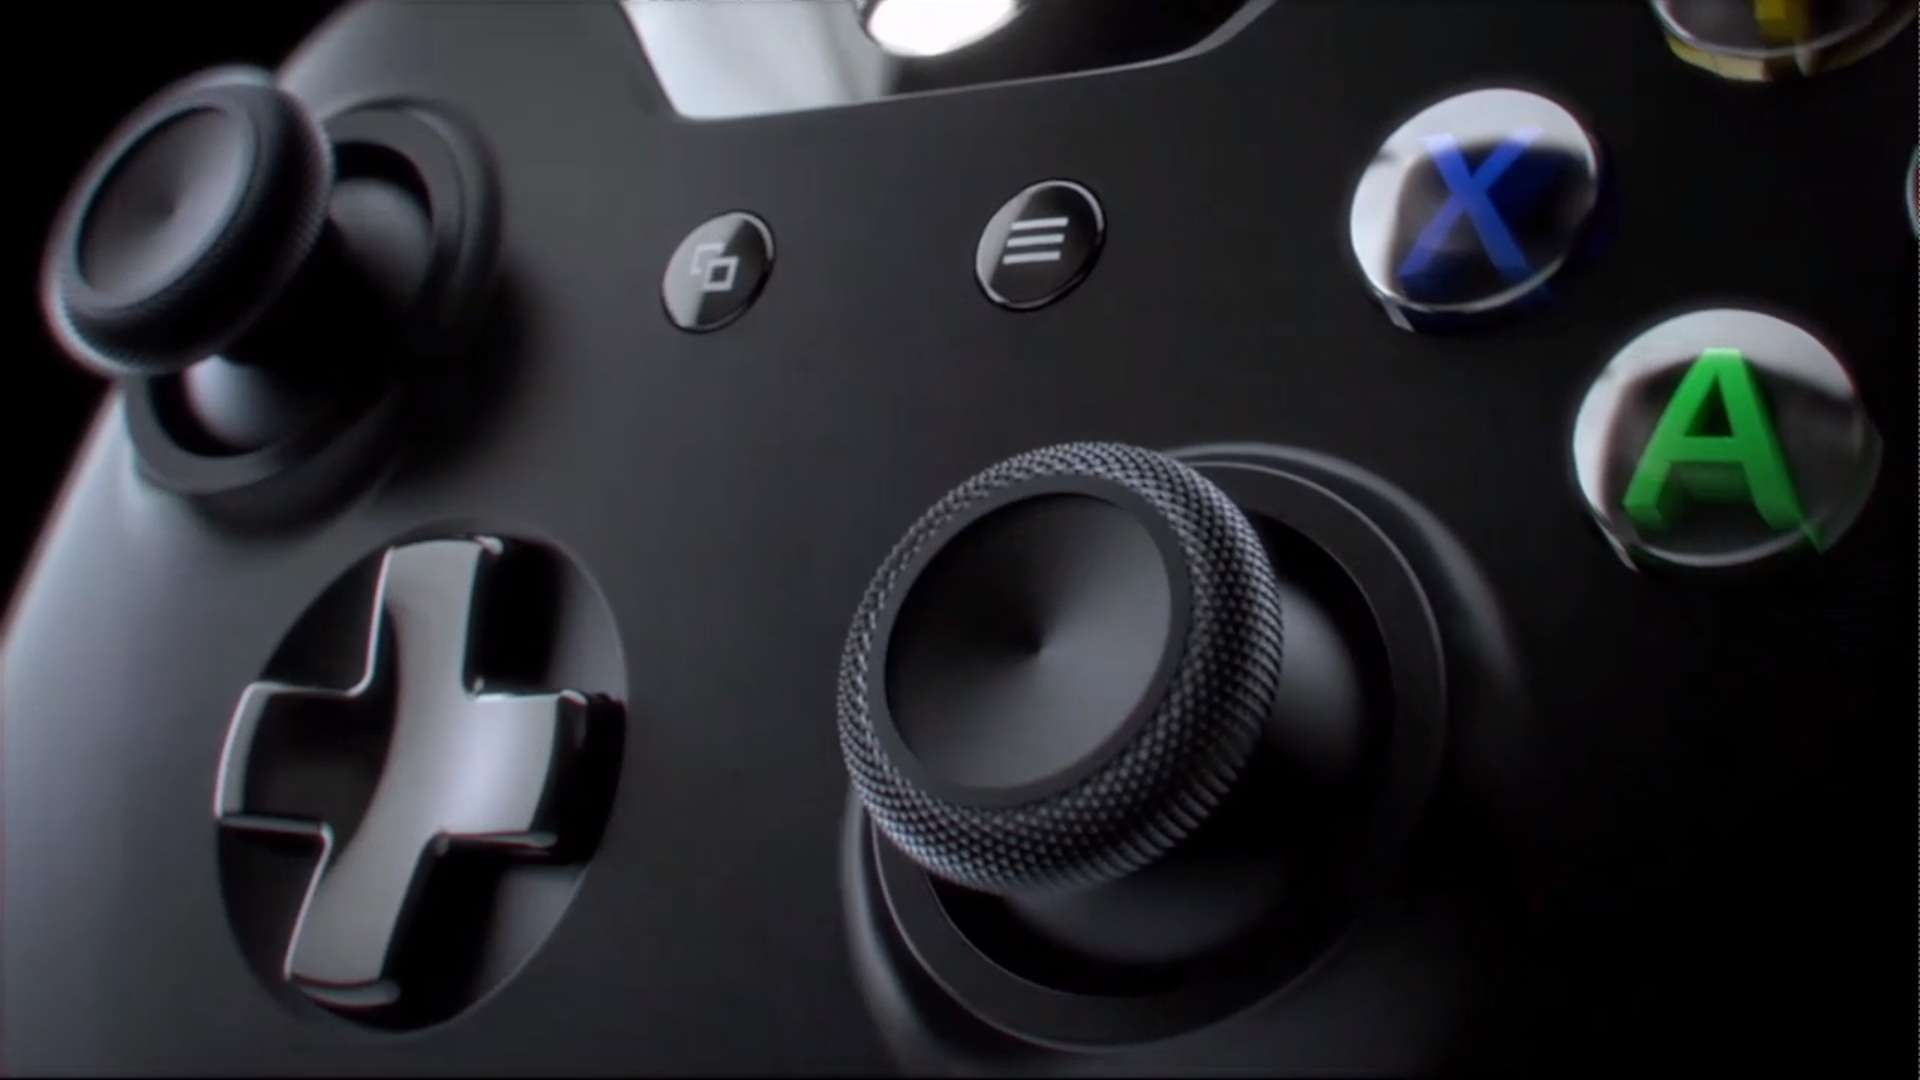 xbox one wallpaper 1920x1080,game controller,gadget,input device,joystick,electronic device